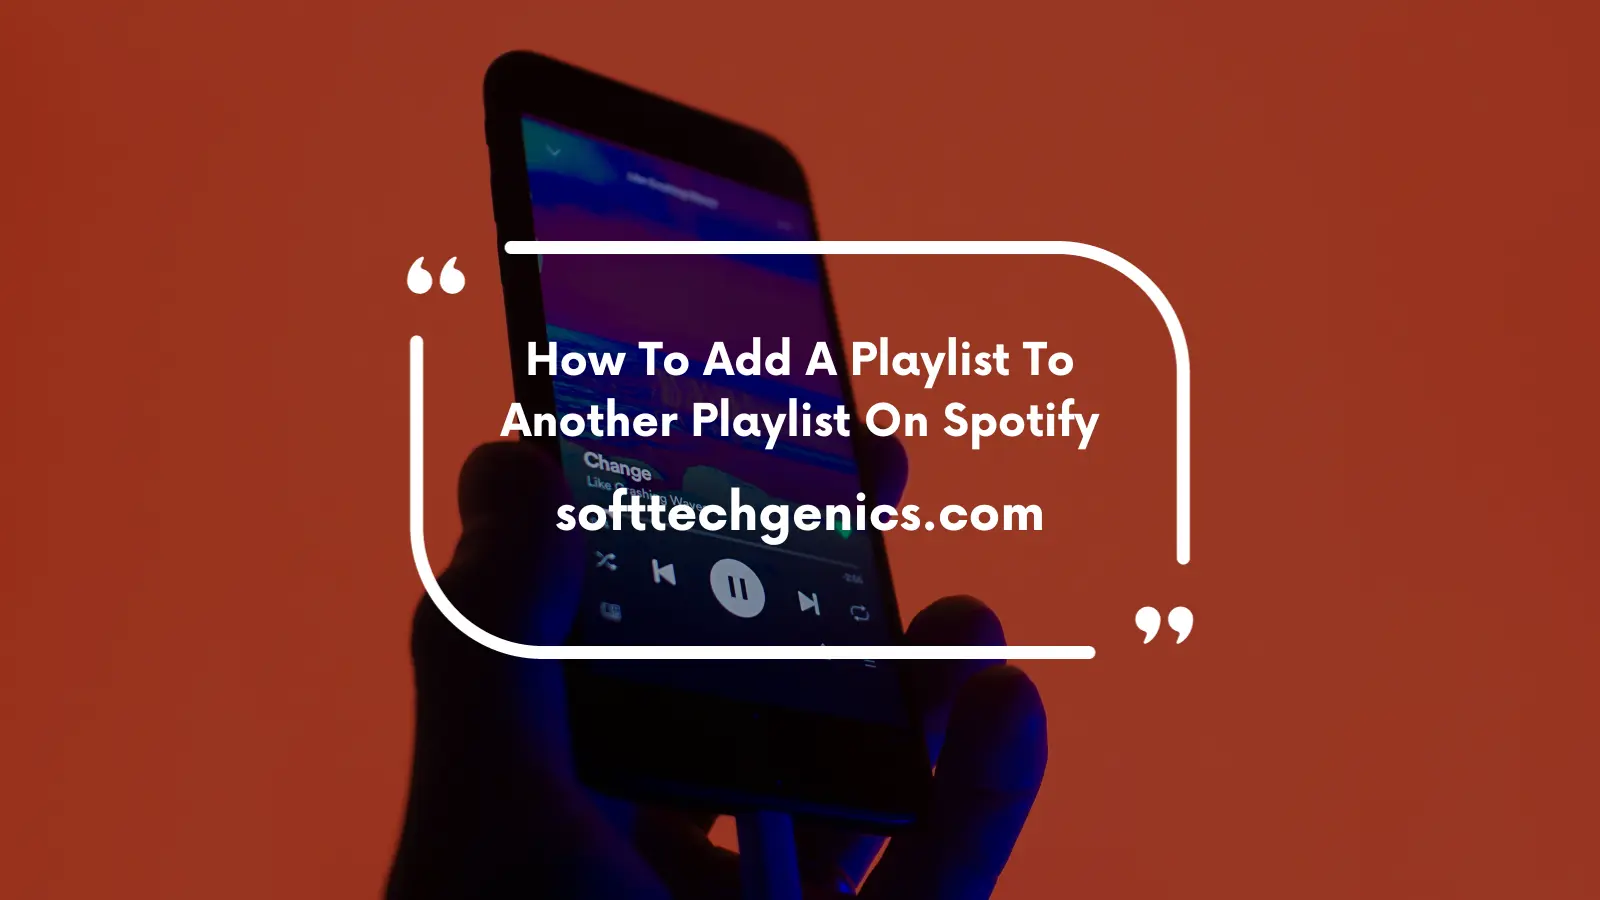 How To Add A Playlist To Another Playlist On Spotify